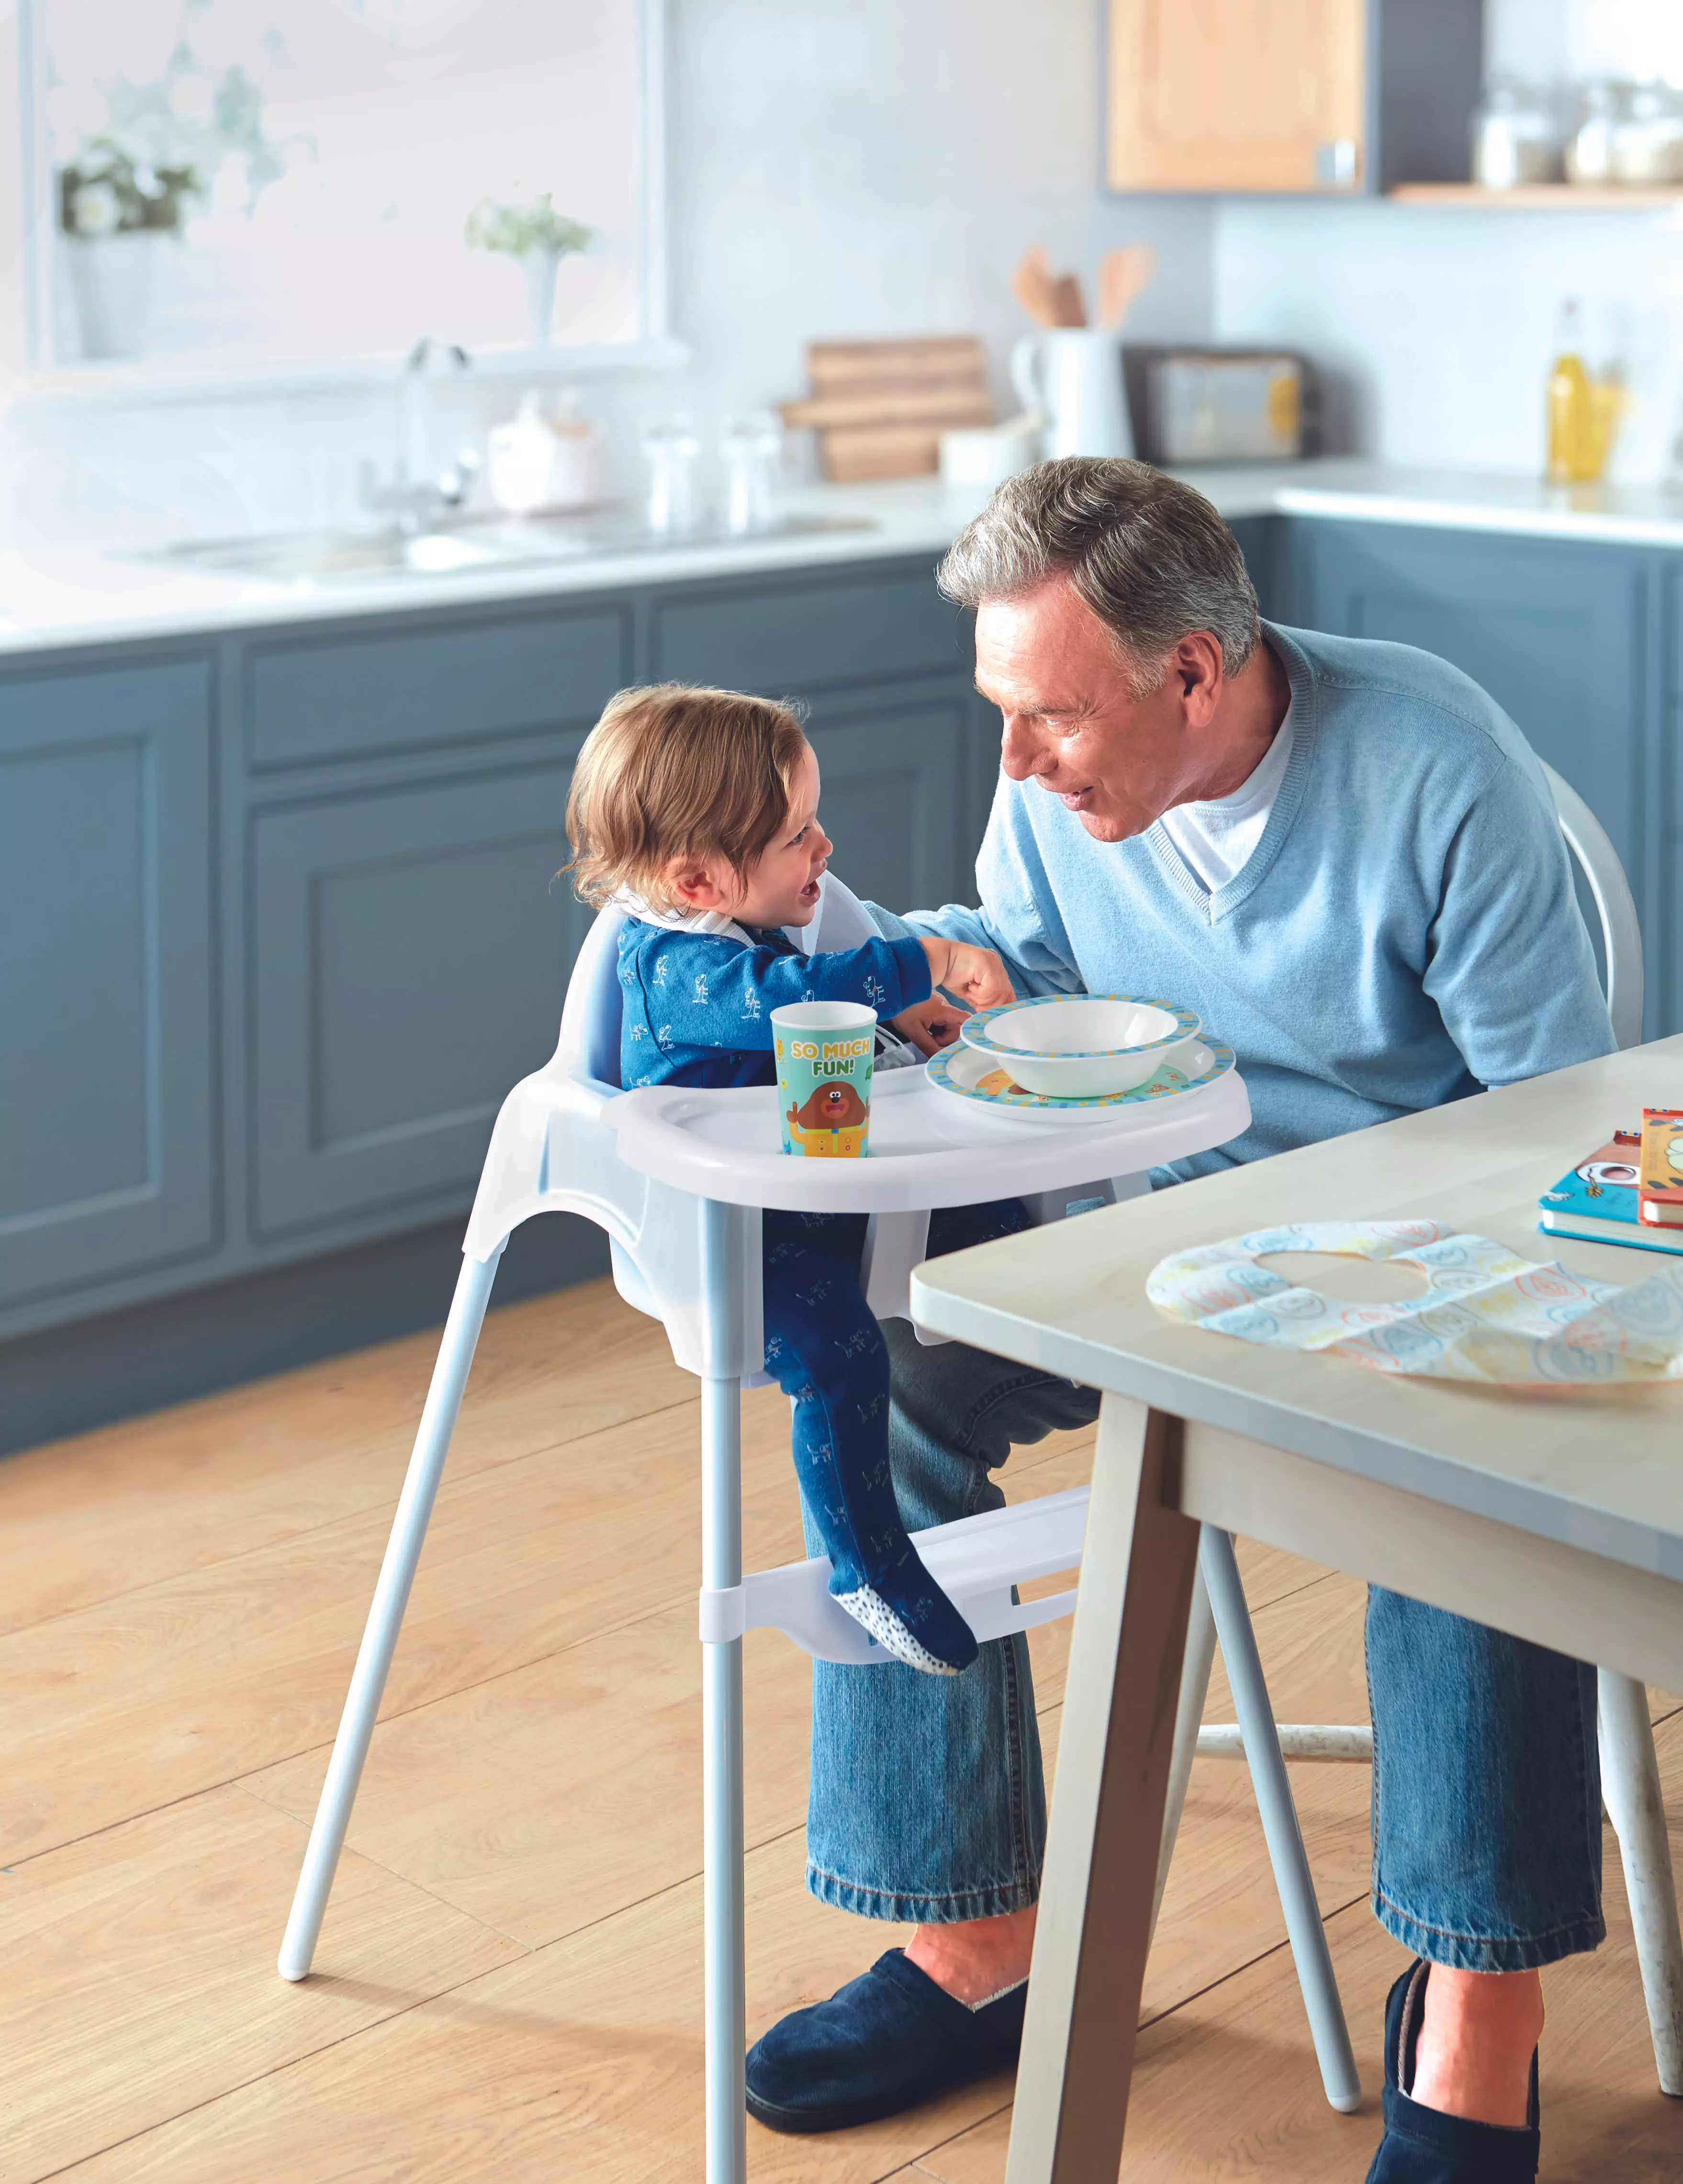 For meal times, the affordable Baby Highchair, priced at £12.99 (